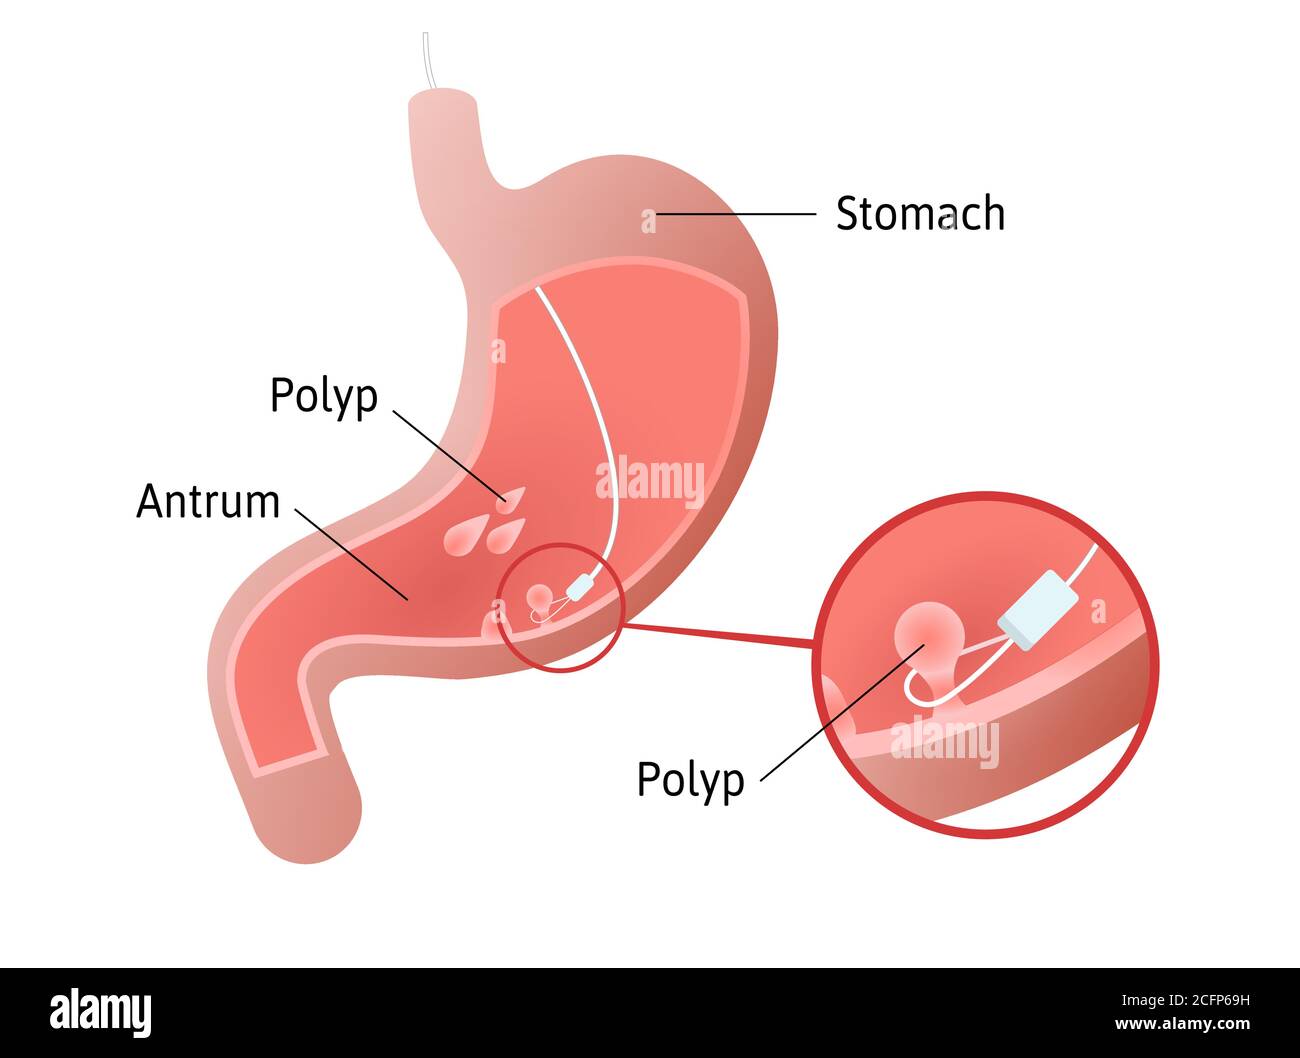 Removal of gastric polyps, masses of cells inside stomach. pedunculated and flat-based polyp. Antrum. Medical vector illustration marked with lines. Stock Vector